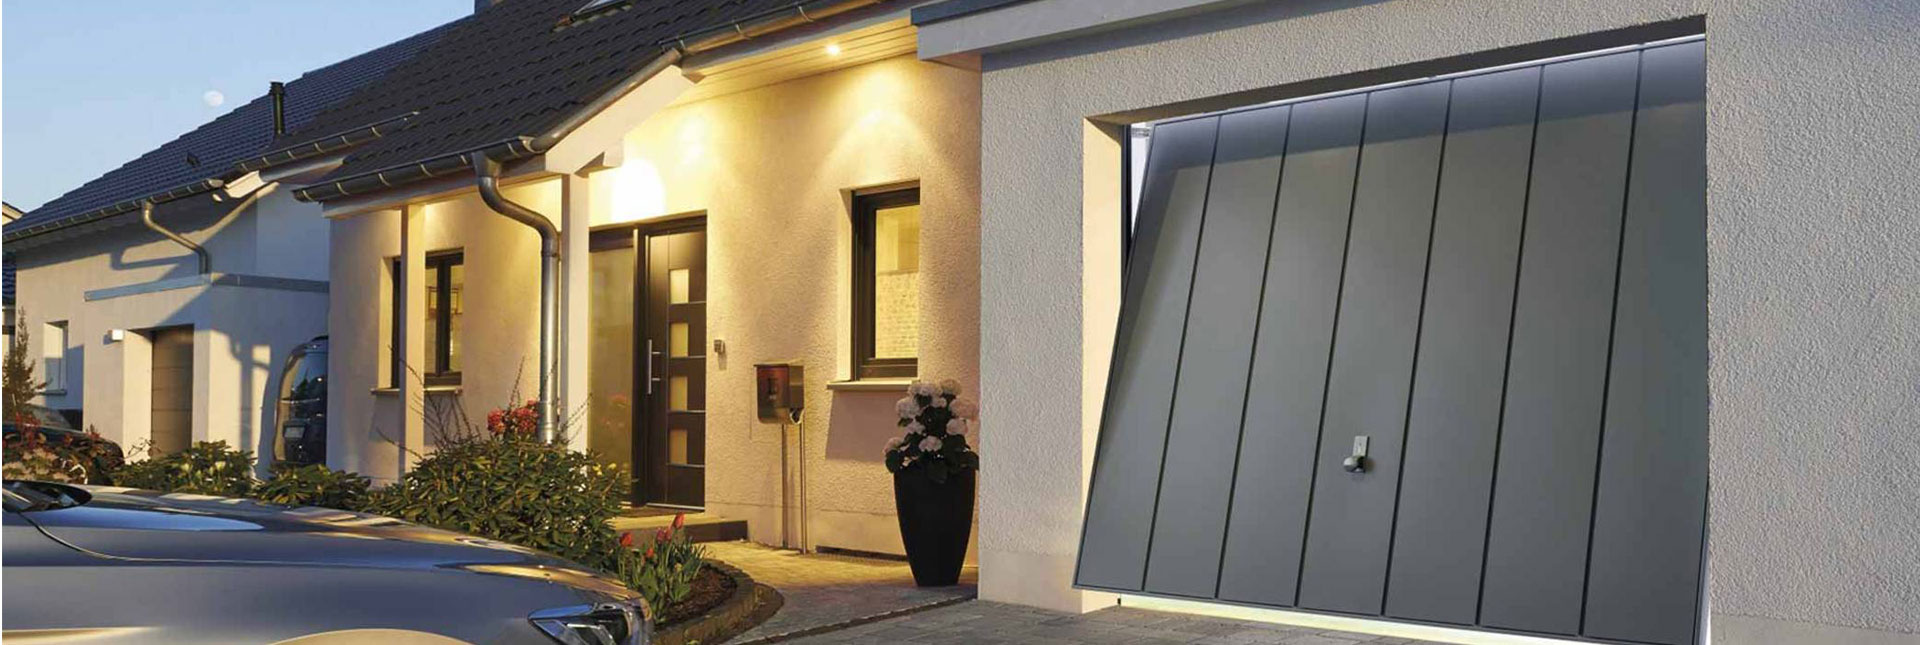 21FAQ: Can I change two garage doors into one?